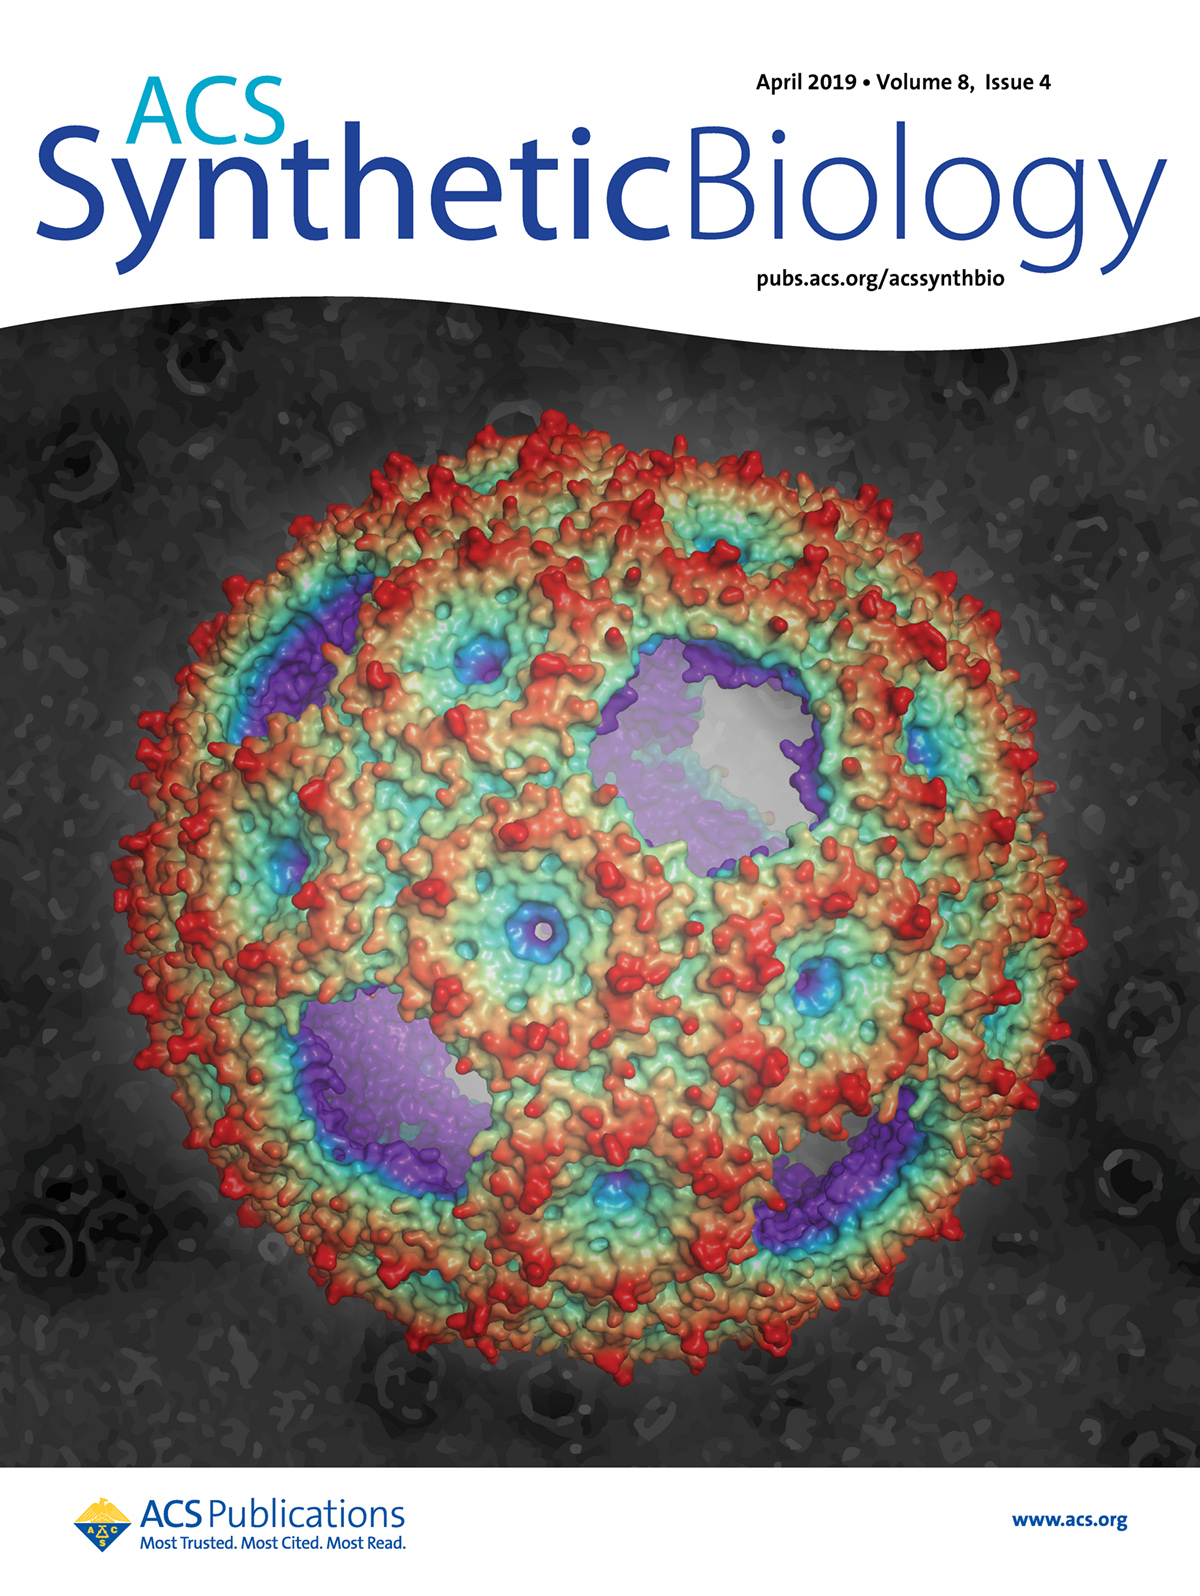 Cover art for volume 8, issue 4 of ACS Synthetic Biology from April 2019 highlights some of the work done by Cheryl Kerfeld’s team. The cover shows a computer rendering of the outer protein shell of a microcompartment synthesized by the team. It looks like a bumpy wiffle ball, with the protein structures protruding out of the surface colored in red, while divots and holes are shown in greens, blues and purples.